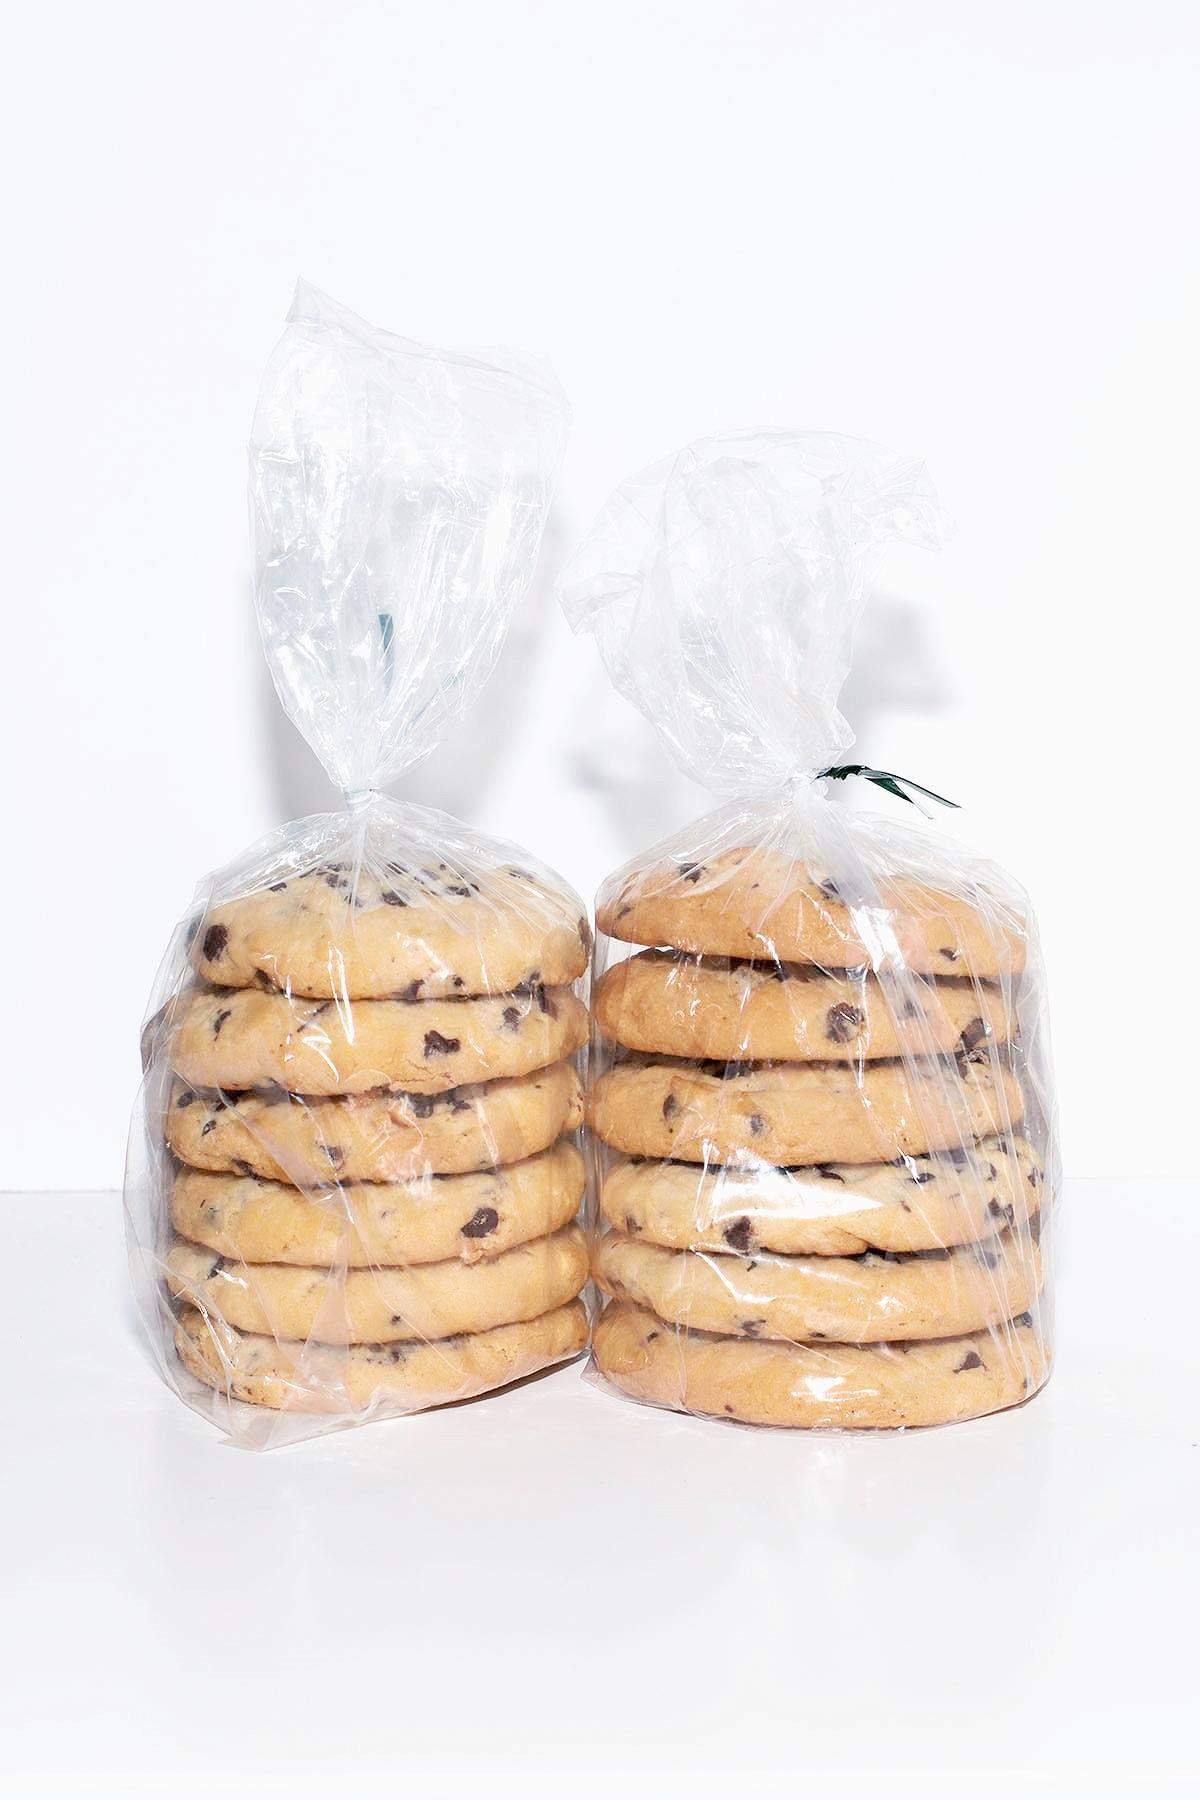 Treats that satisfy your cravings - cookies, biscuits, squares, pan rolls